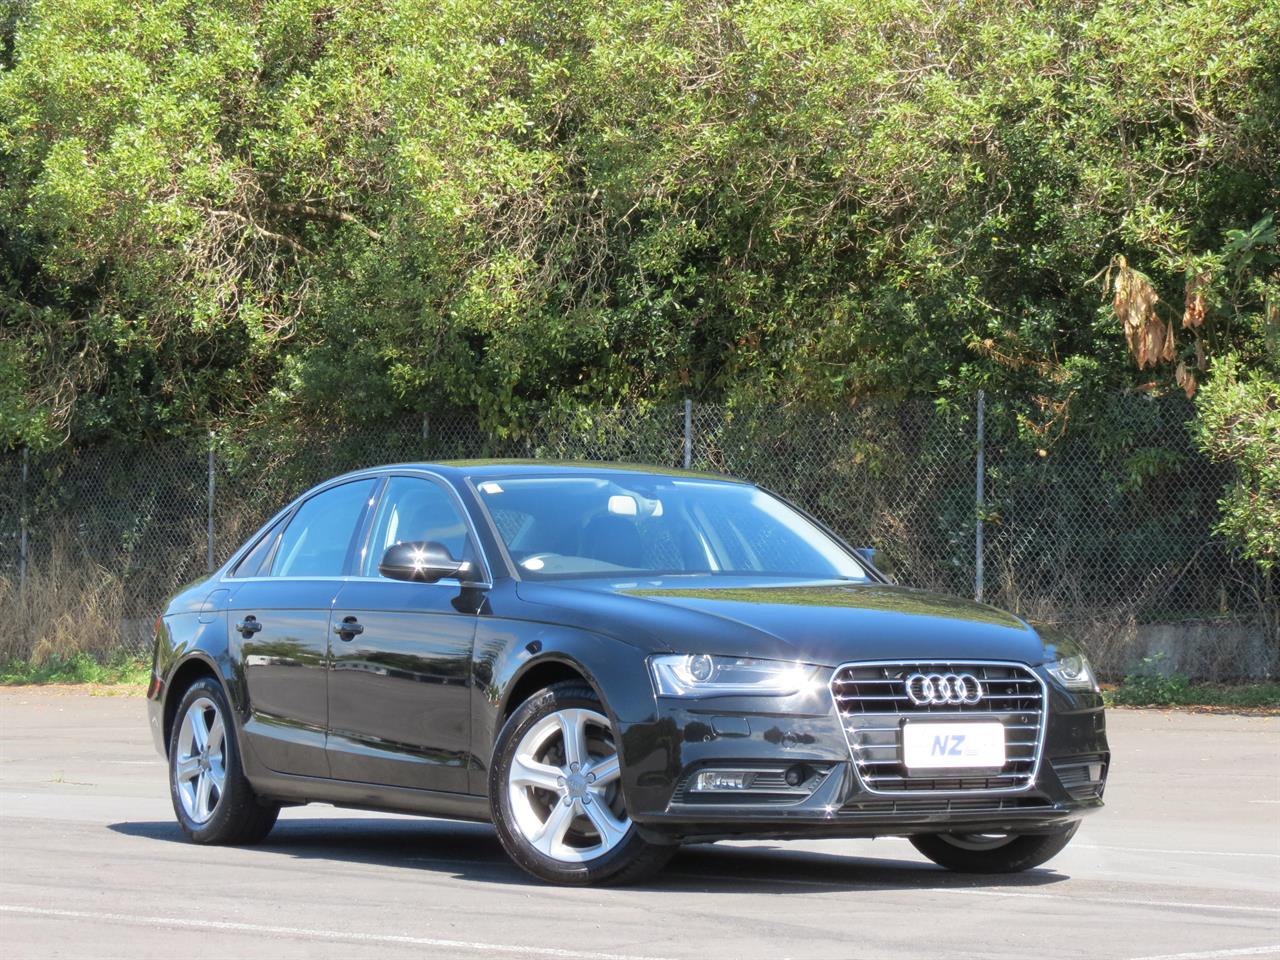 NZC 2015 Audi A4 just arrived to Auckland